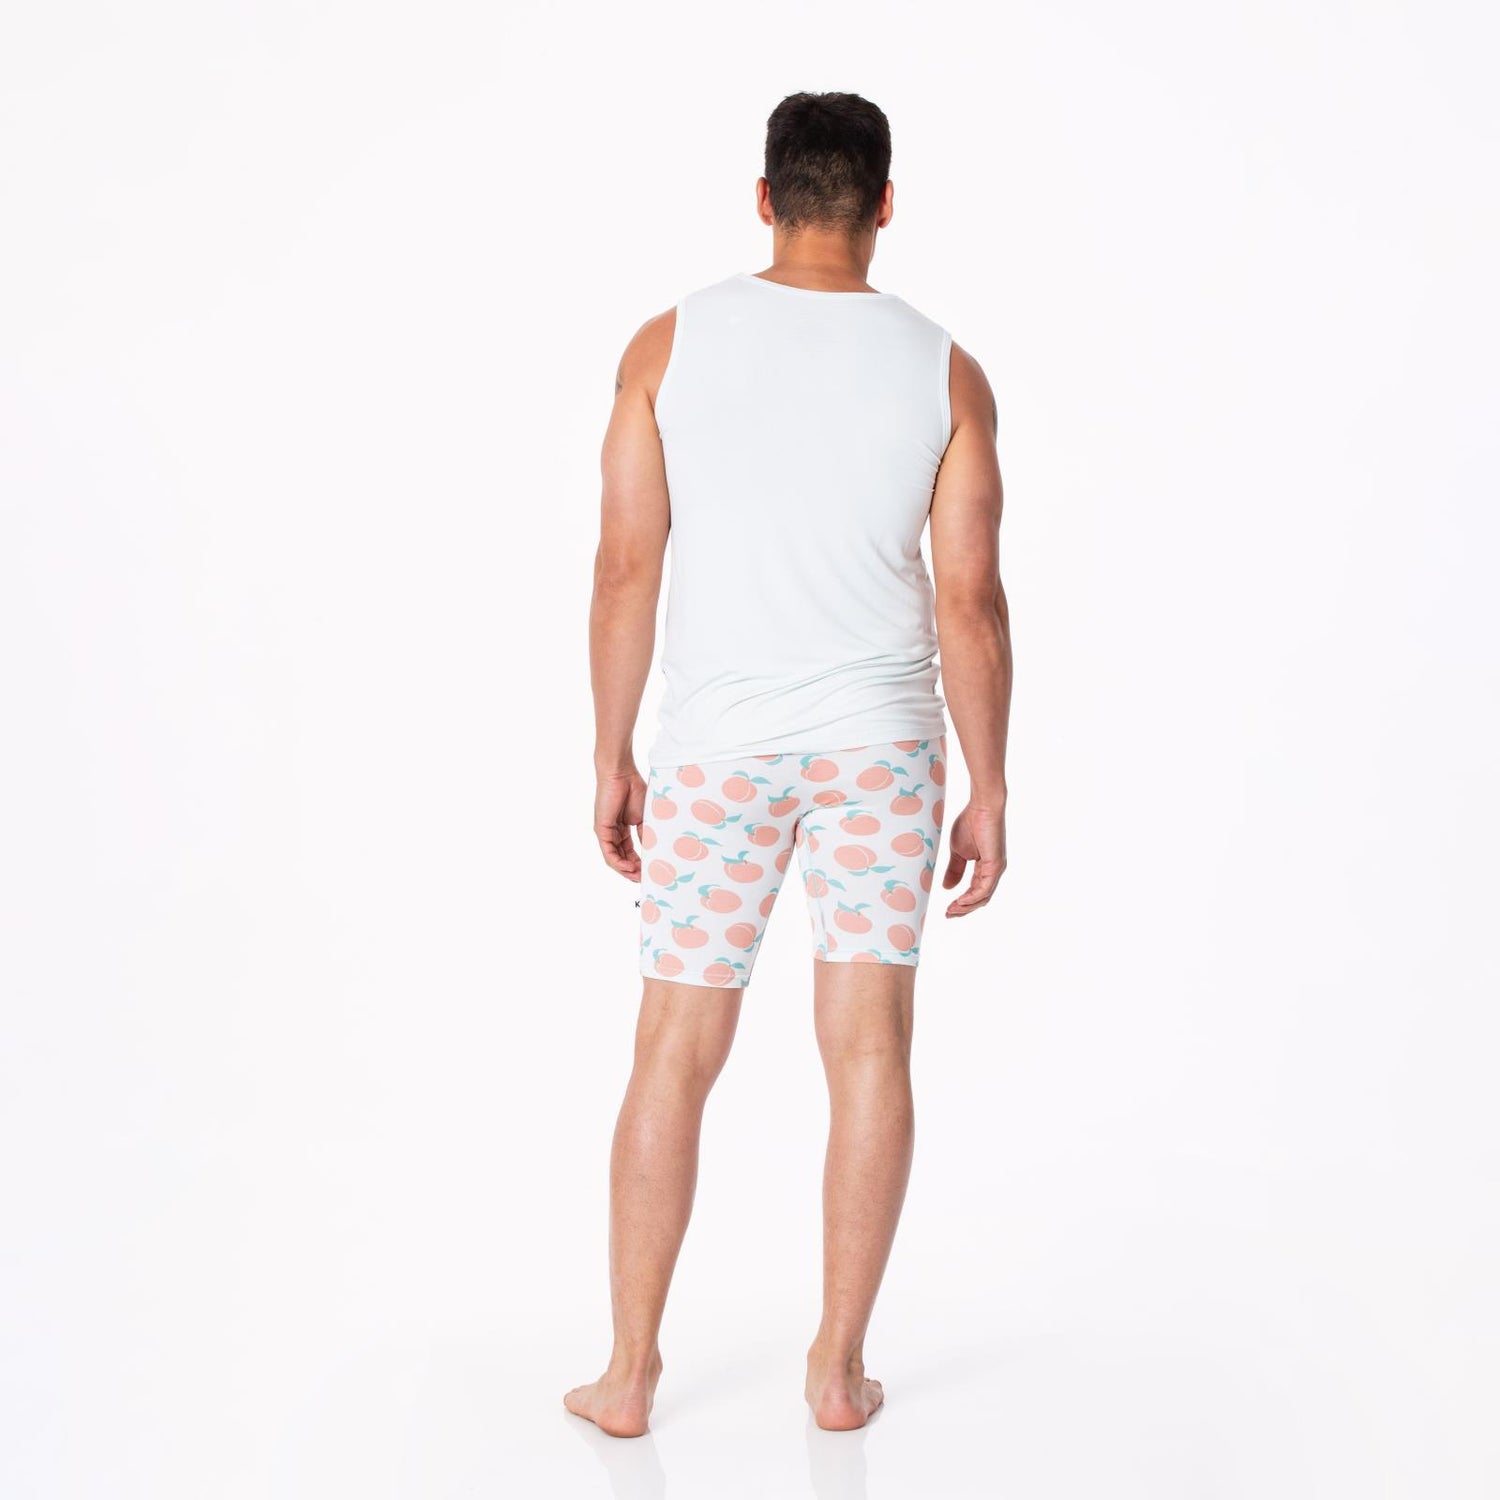 Men's Print Long Boxer Brief with Top Fly in Fresh Air Peaches